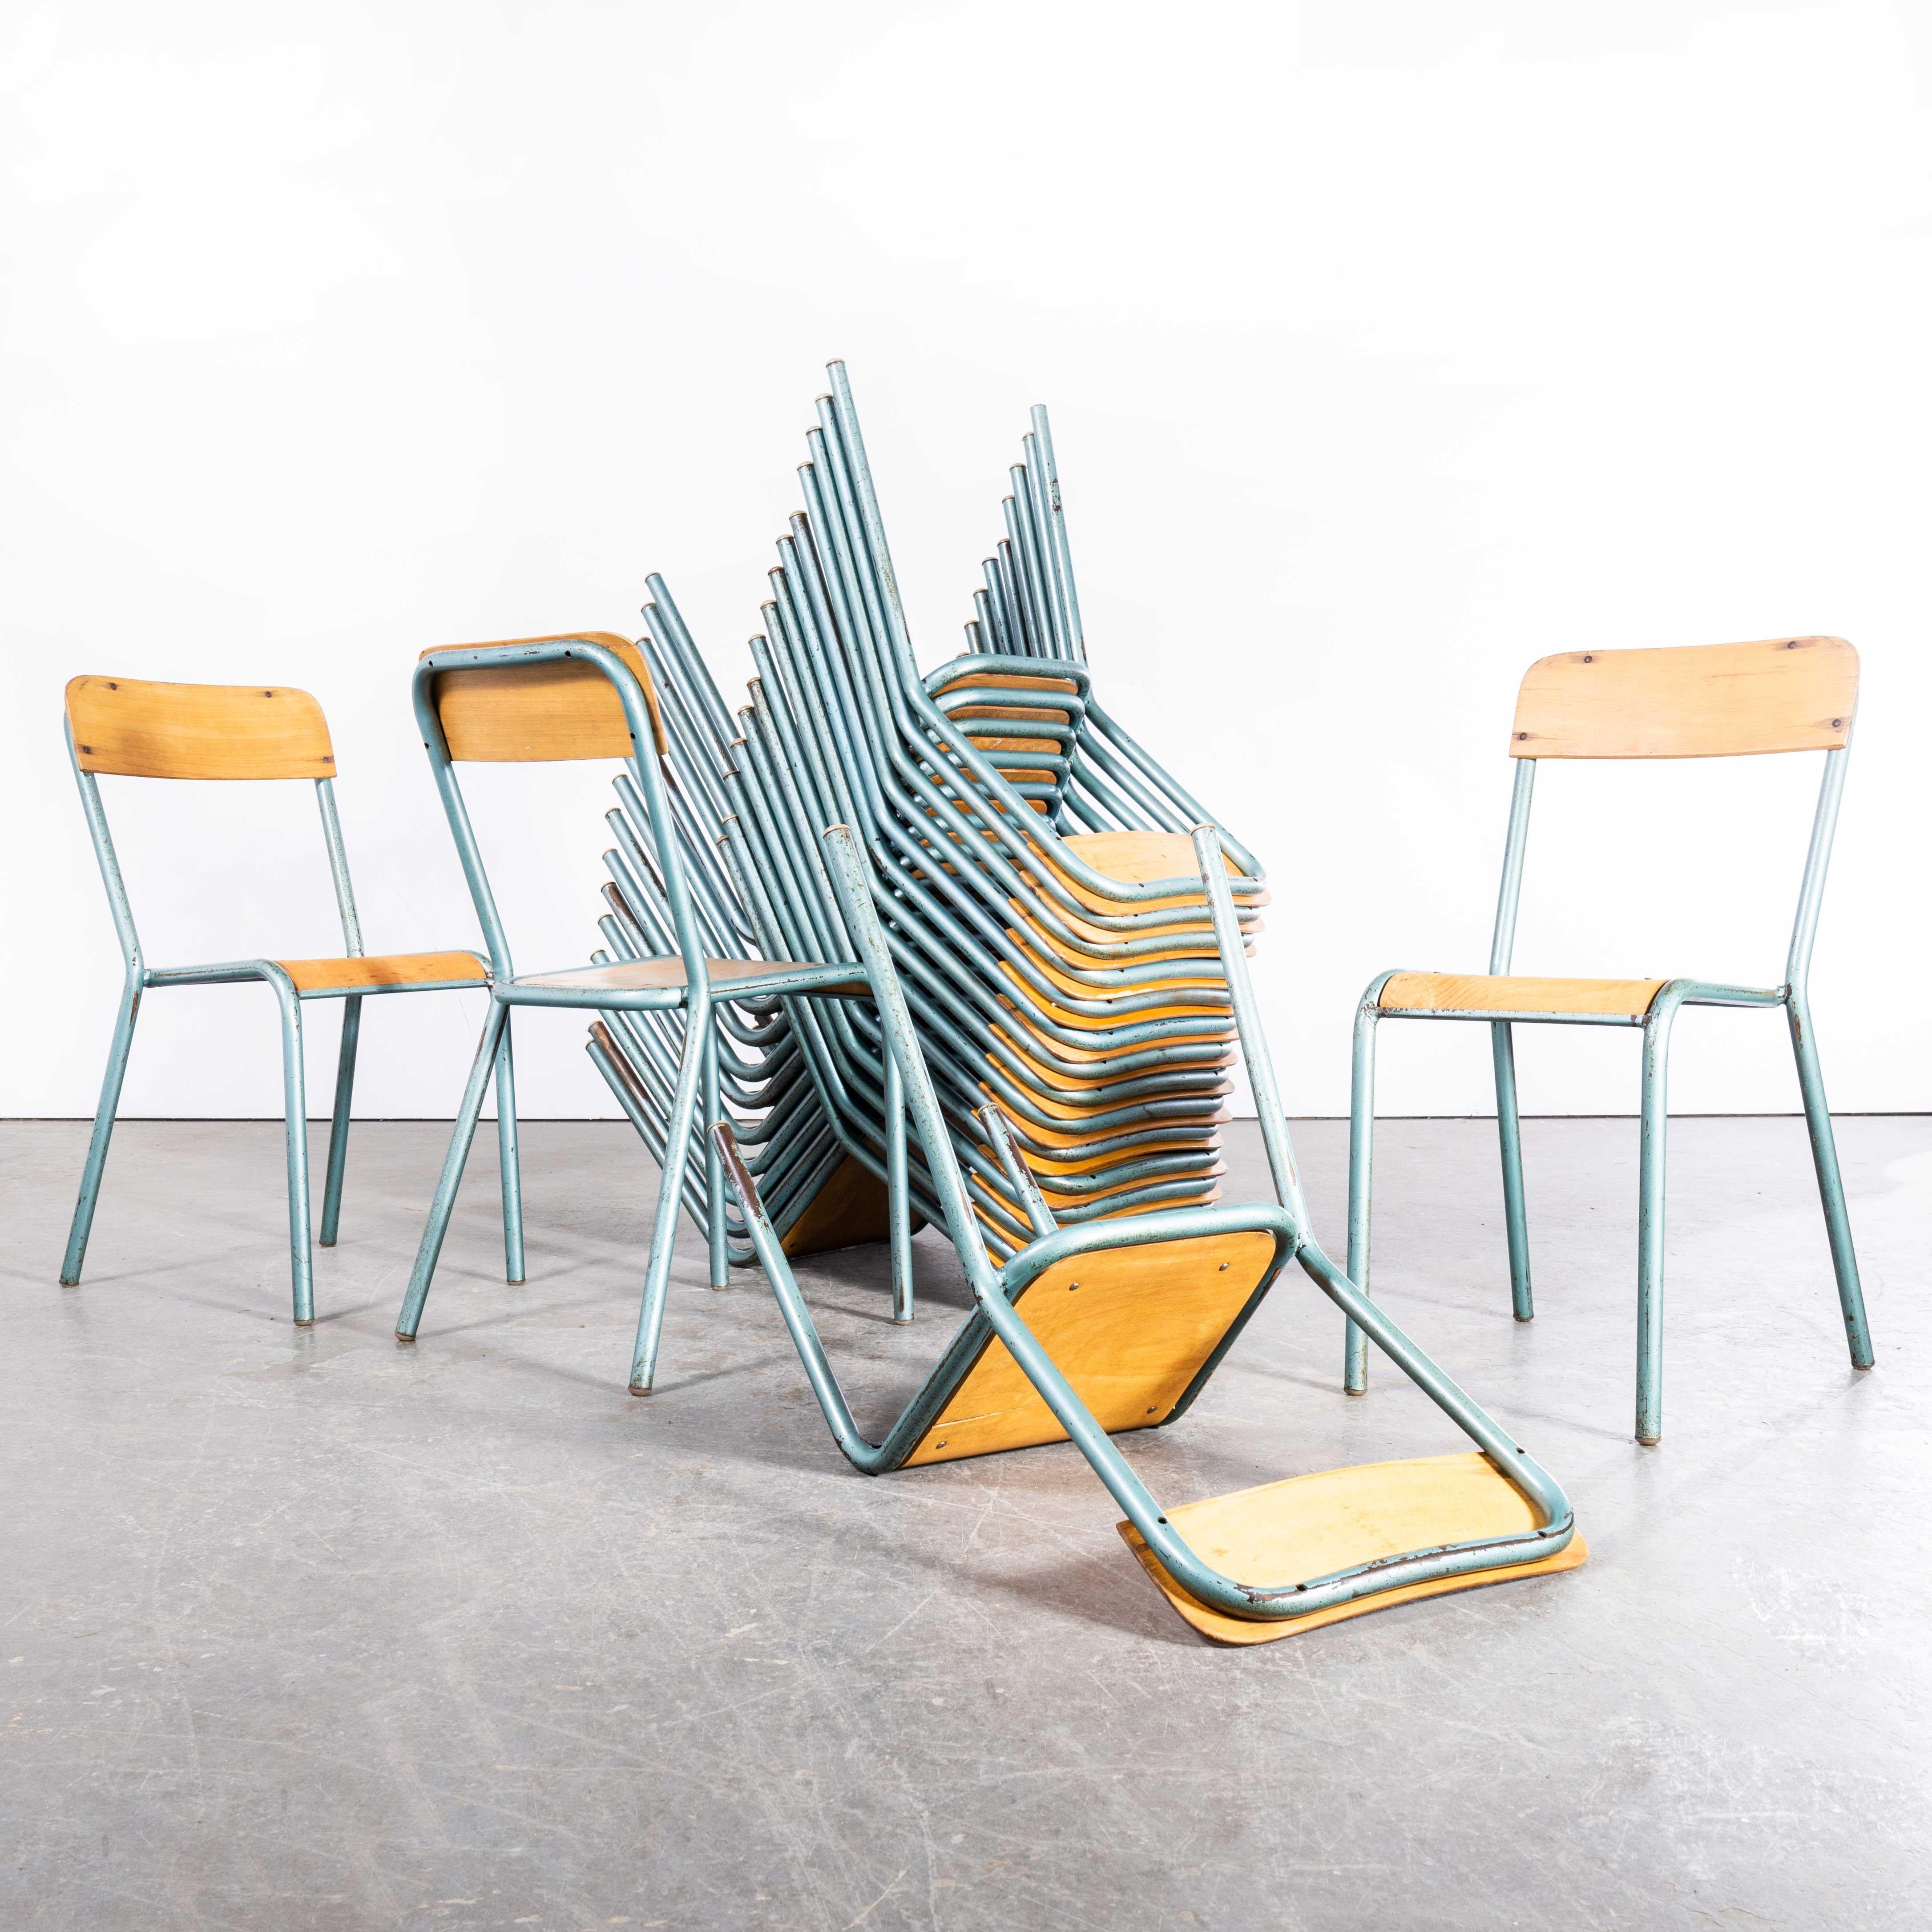 1950s French Mullca D Back Stacking – Dining Chairs – Aqua – Set Of Twenty
1950s French Mullca D Back Stacking – Dining Chairs – Aqua – Set Of Twenty. One of our most favourite chairs, in 1947 Robert Muller and Gaston Cavaillon created the company